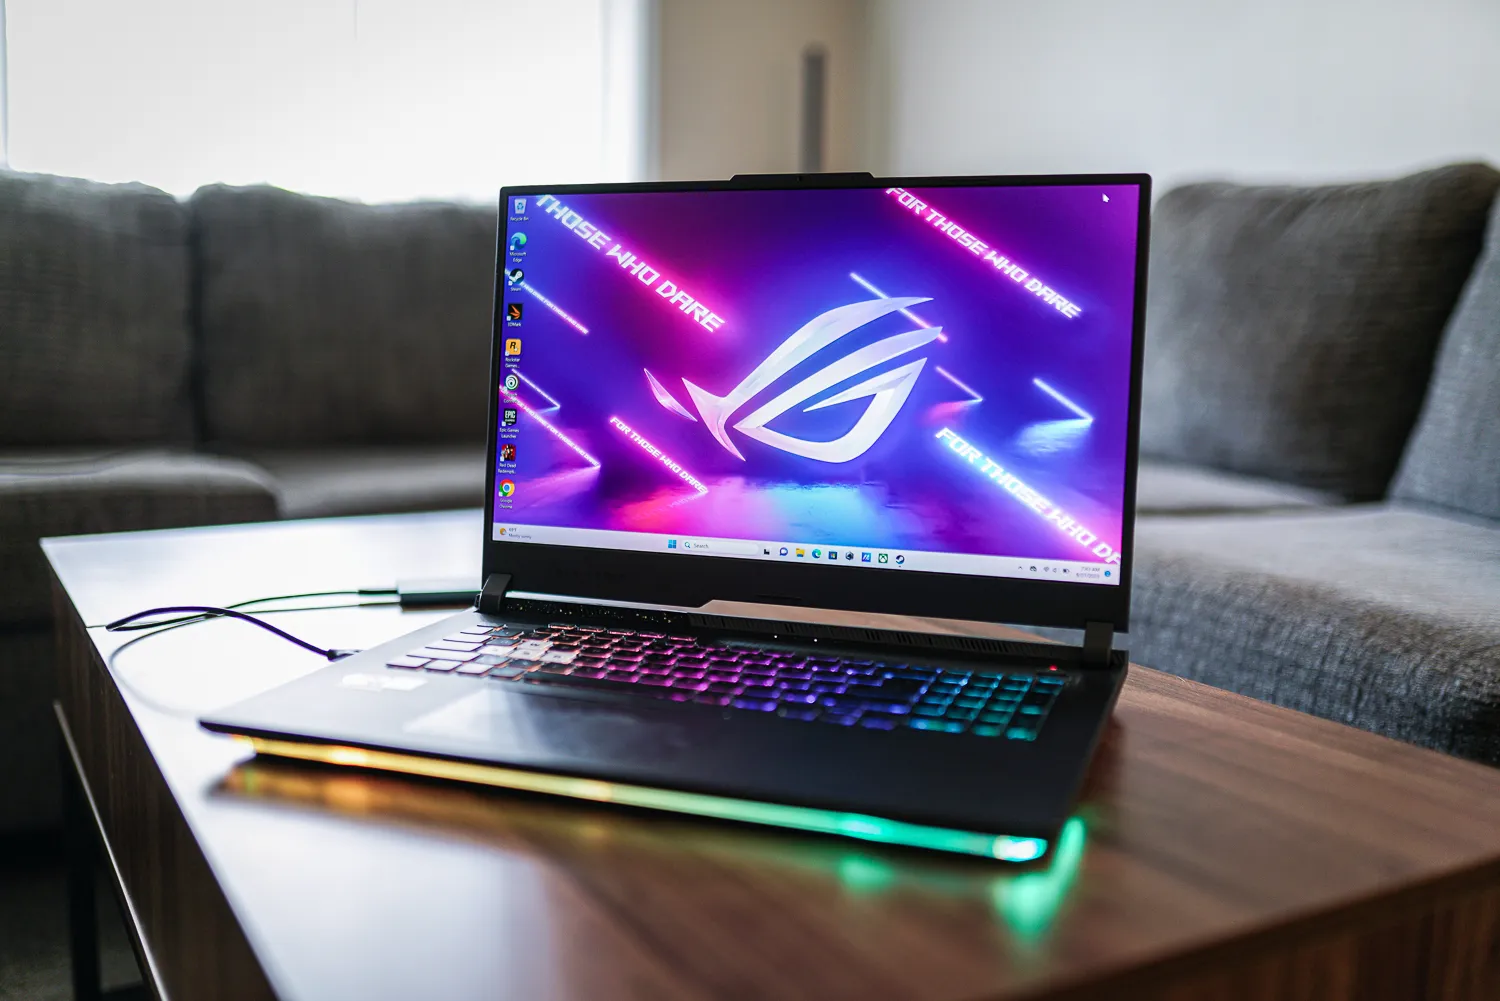 Asus ROG Strix G17 sitting on a table.